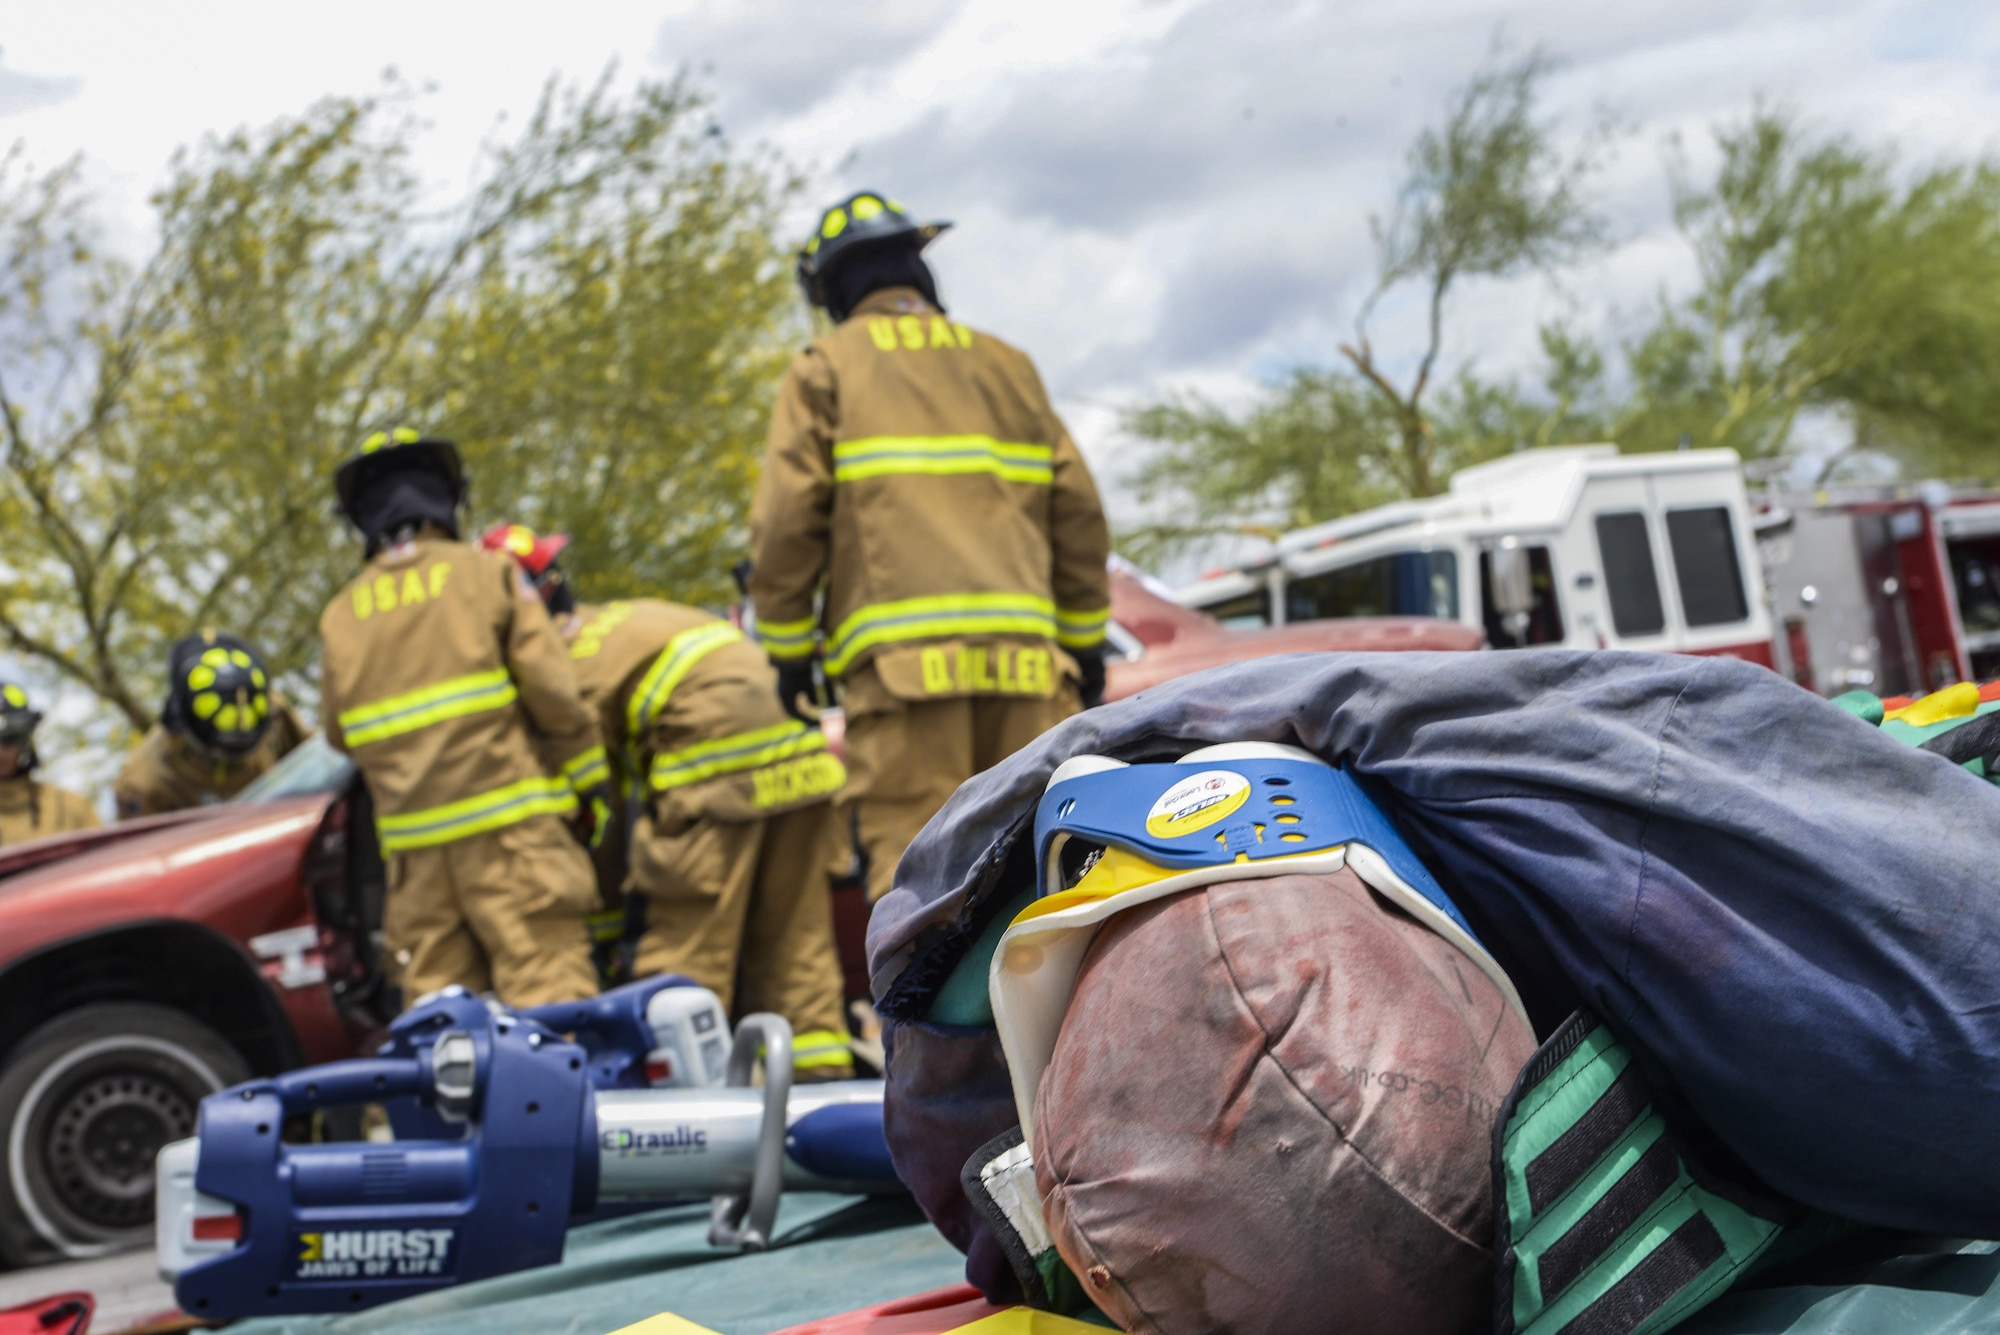 Firefighters from the 99th Civil Engineer Squadron prepare to lift the dashboard from the front seats of a simulated car crash at Nellis Air Force Base, Nev., May 17, 2017. The simulation required firefighters to respond to an overturned vehicle in which the victim had to be evacuated, by removing the doors and roof of the vehicle. (U.S. Air Force photo by Airman 1st Class Andrew D. Sarver/Released)